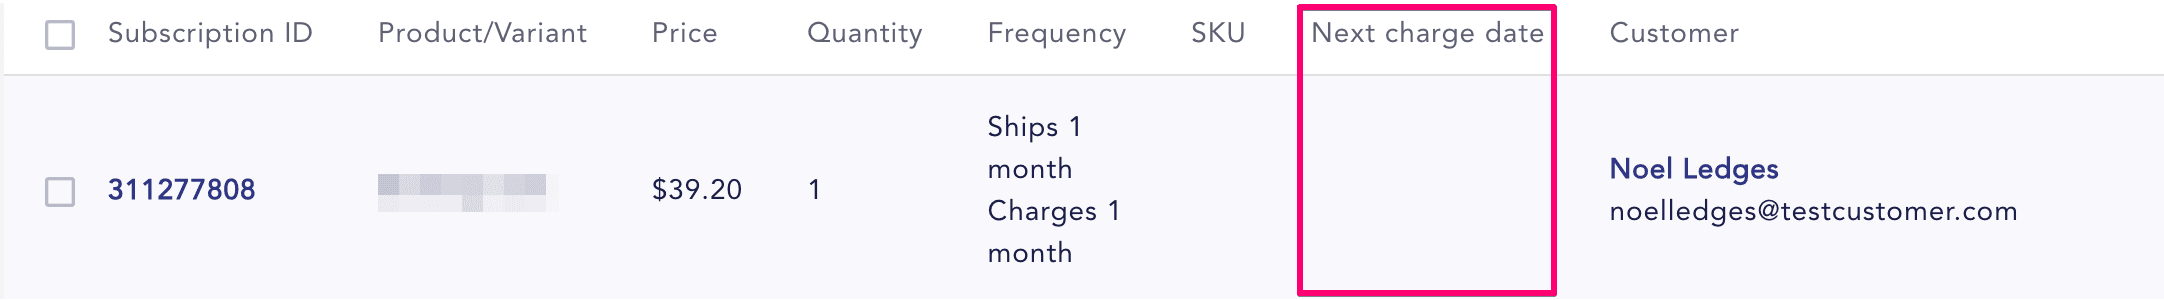 next charge date does not show on merchant portal